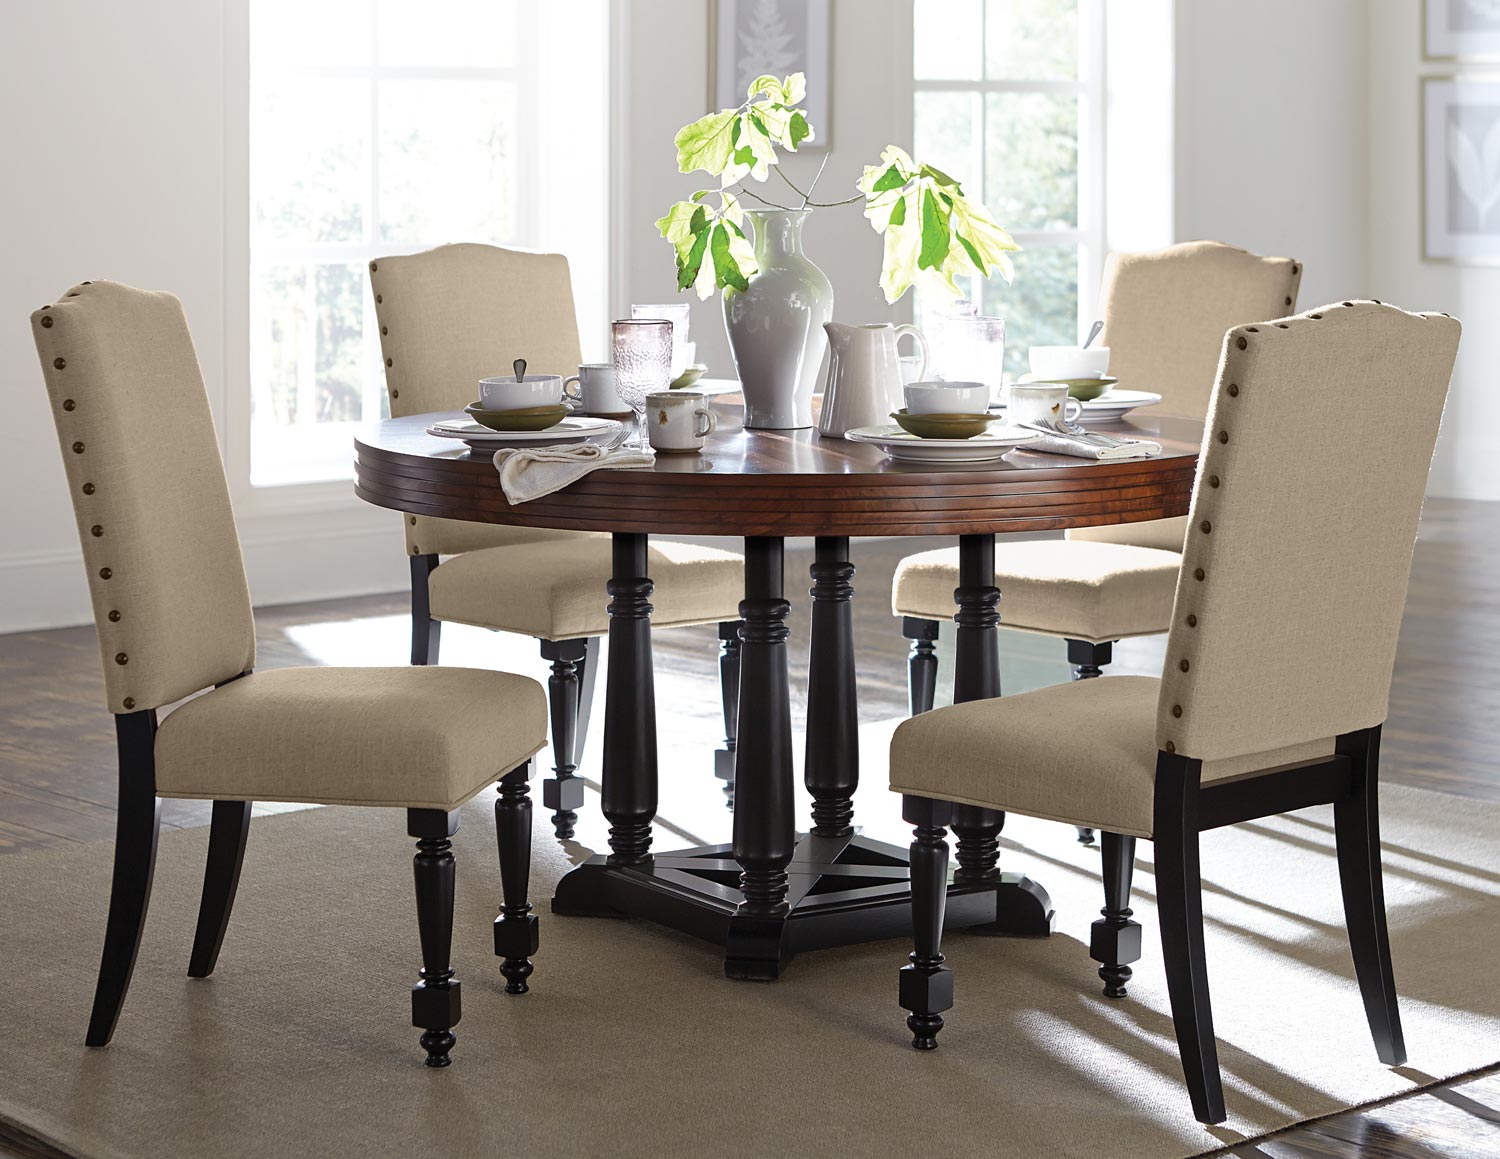 Homelegance Blossomwood Round Dining Set with Fabric Chairs - Cherry/Black